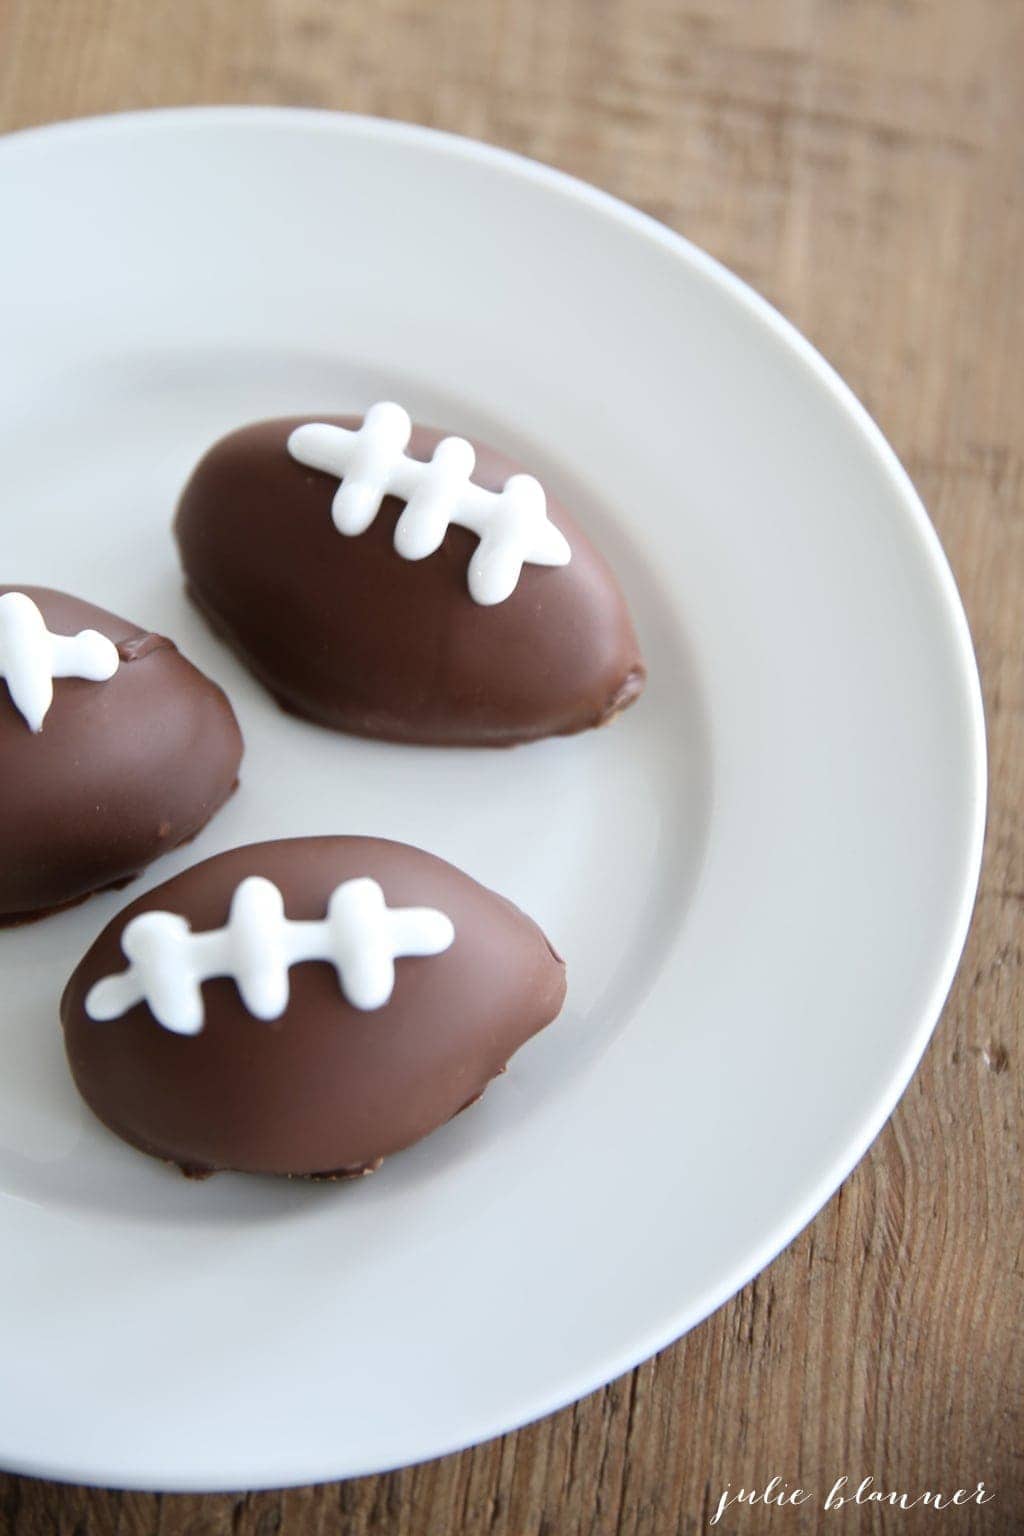 Snacks decorated as footballs